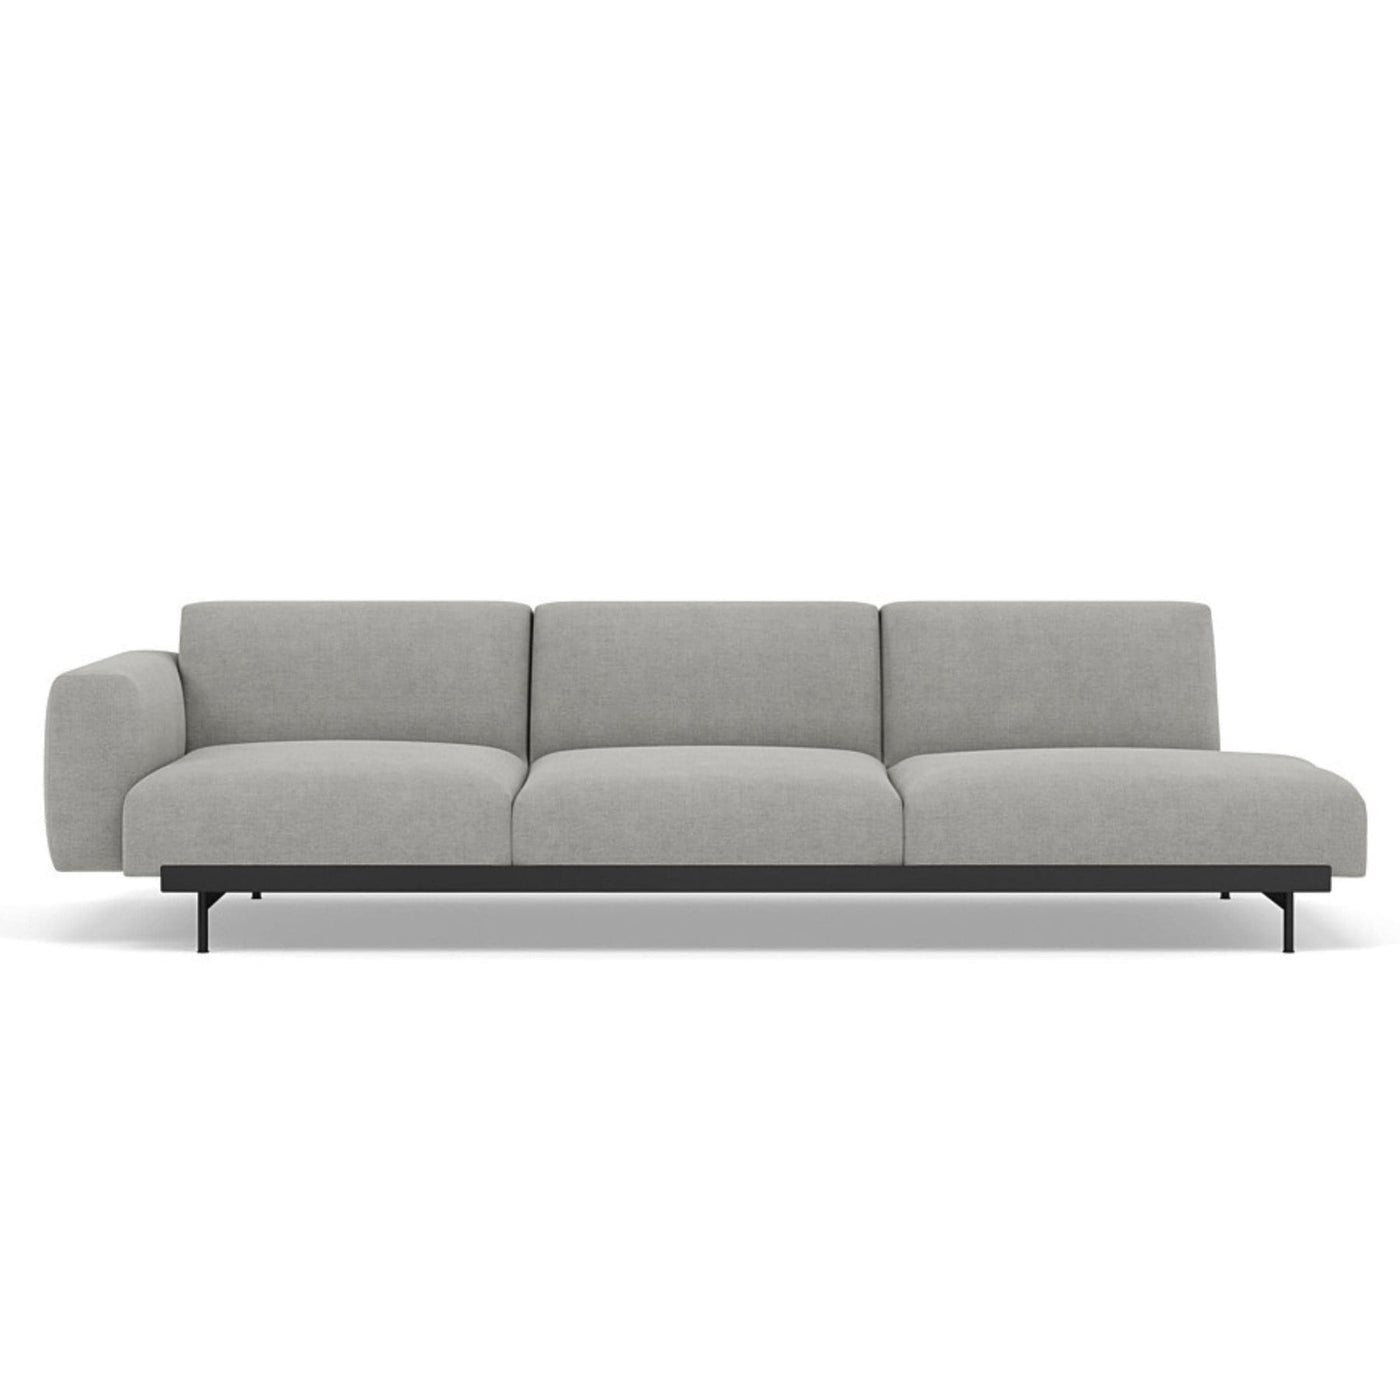 Muuto In Situ Modular 3 Seater Sofa, configuration 3. Made to order from someday designs. #colour_fiord-151